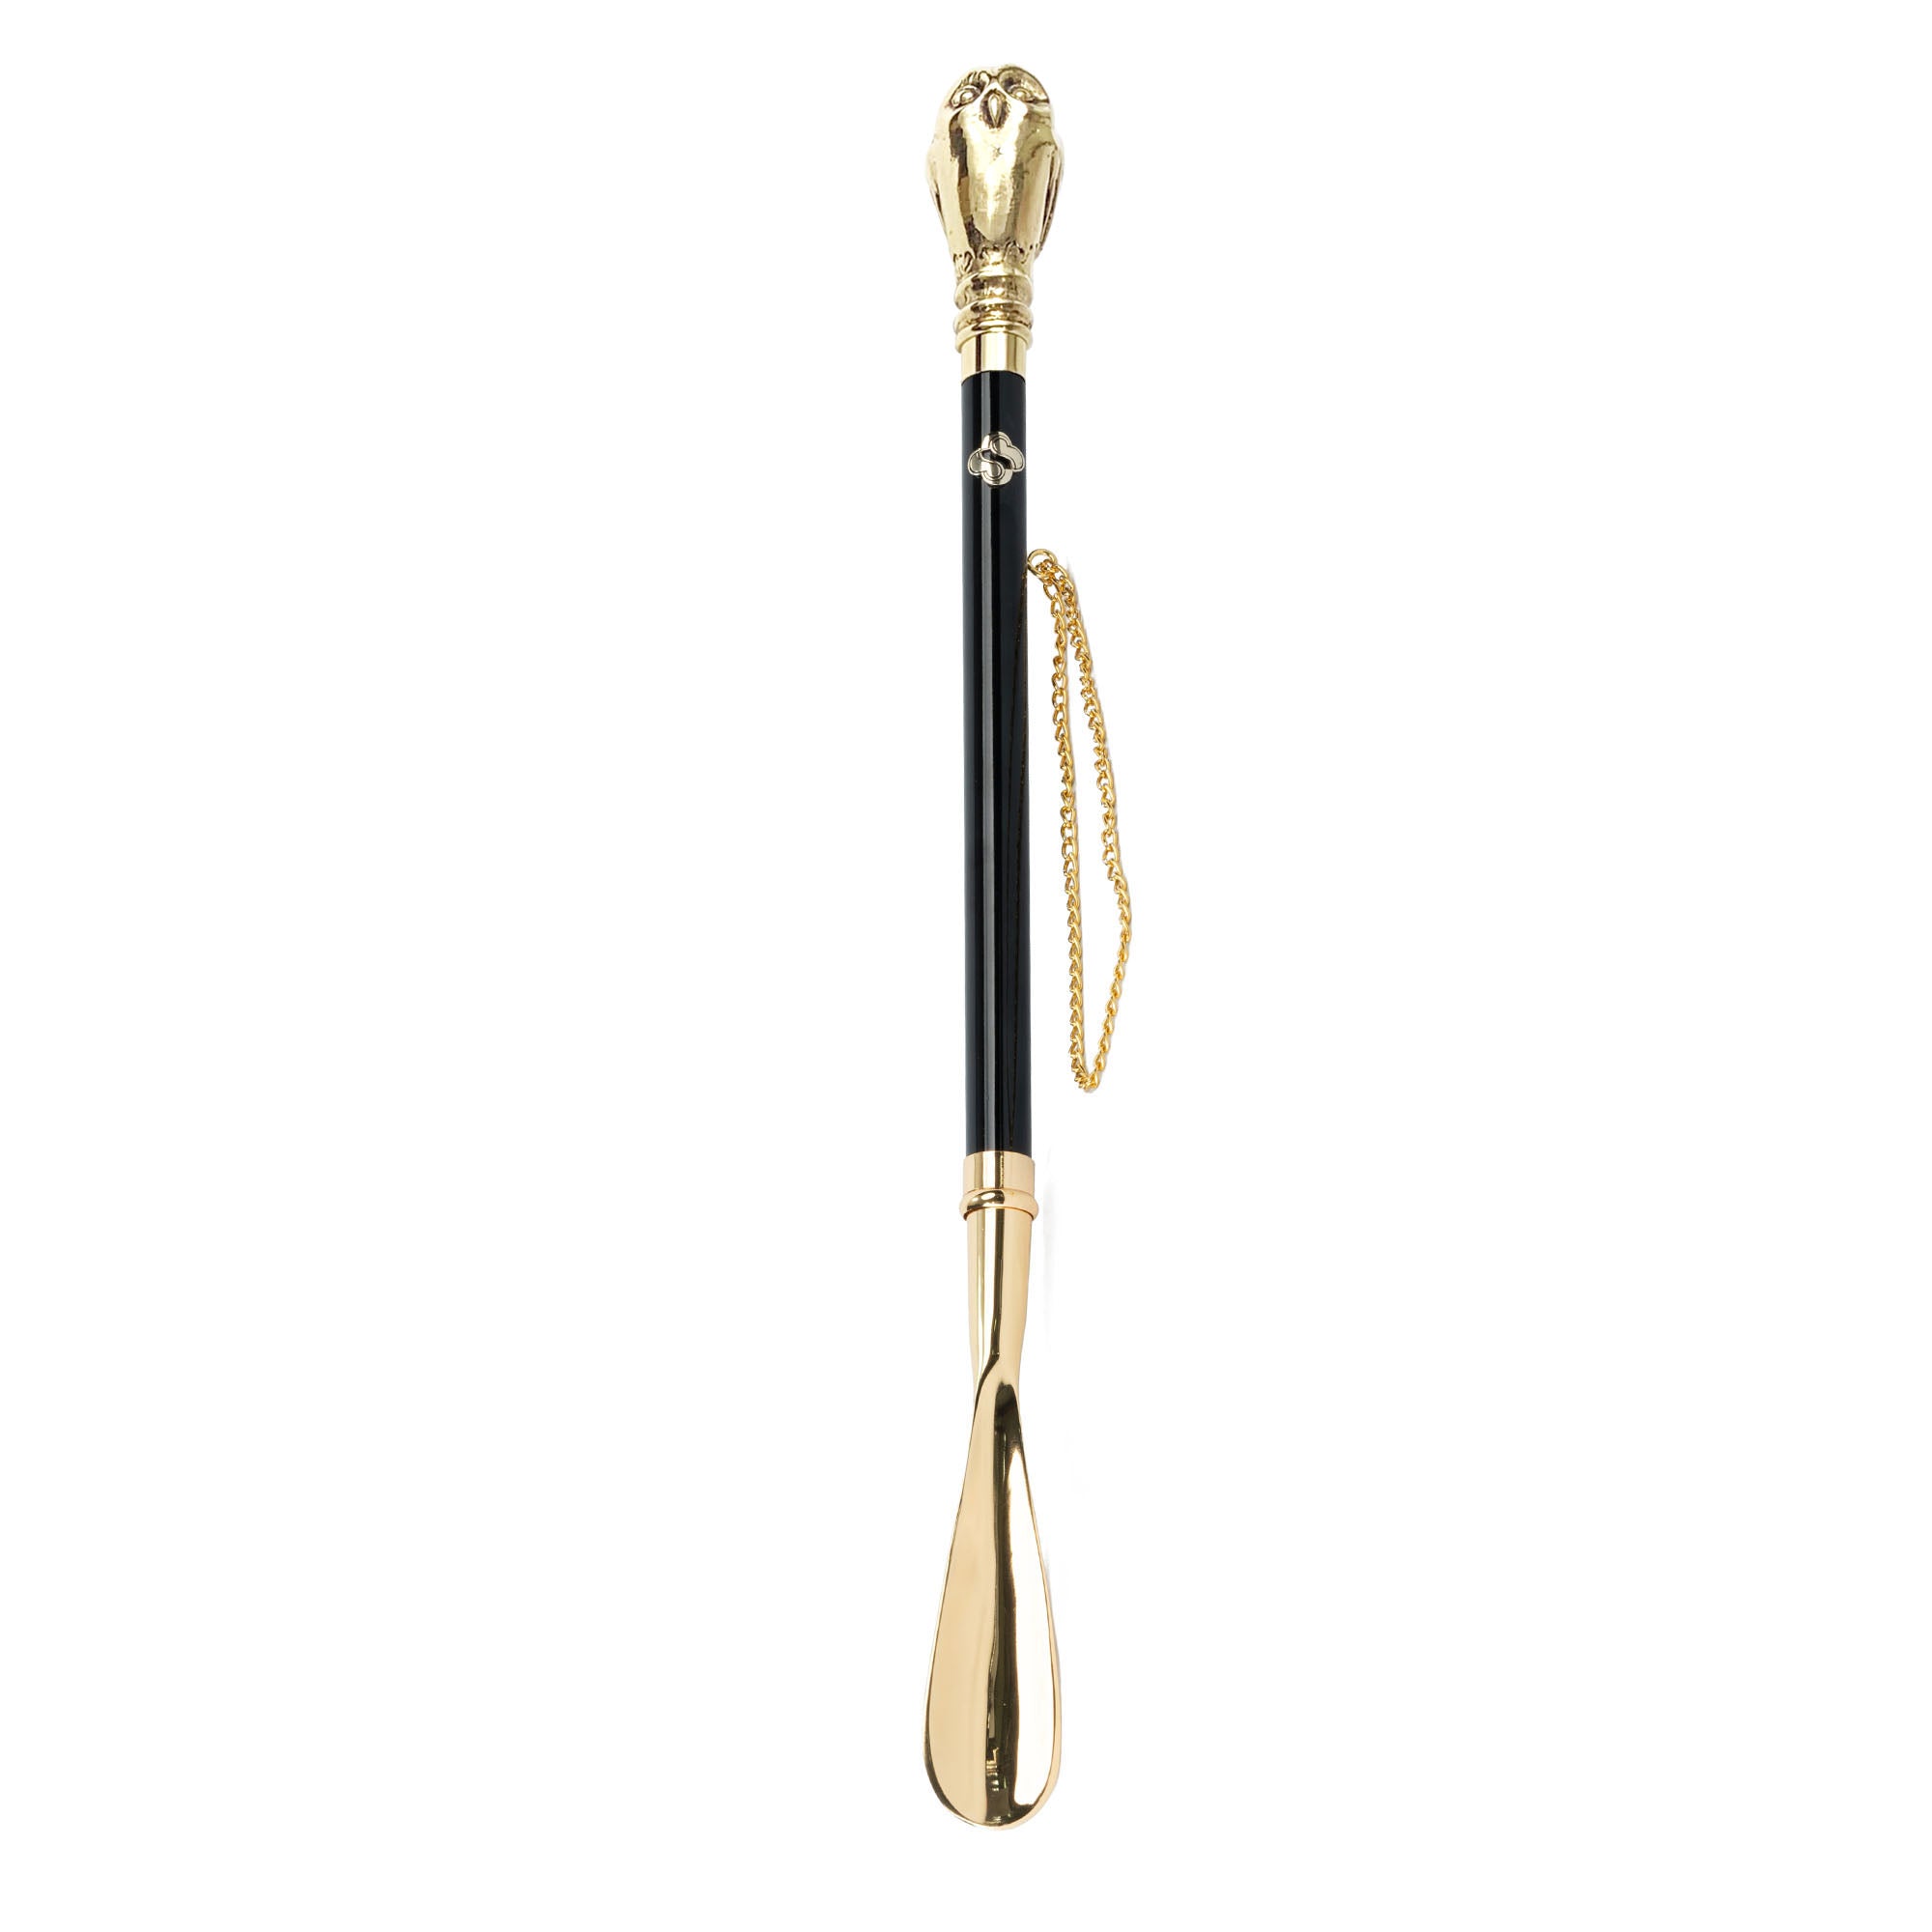 24K Gold-Plated Shoehorn with Owl Handle: Artistry Unleashed